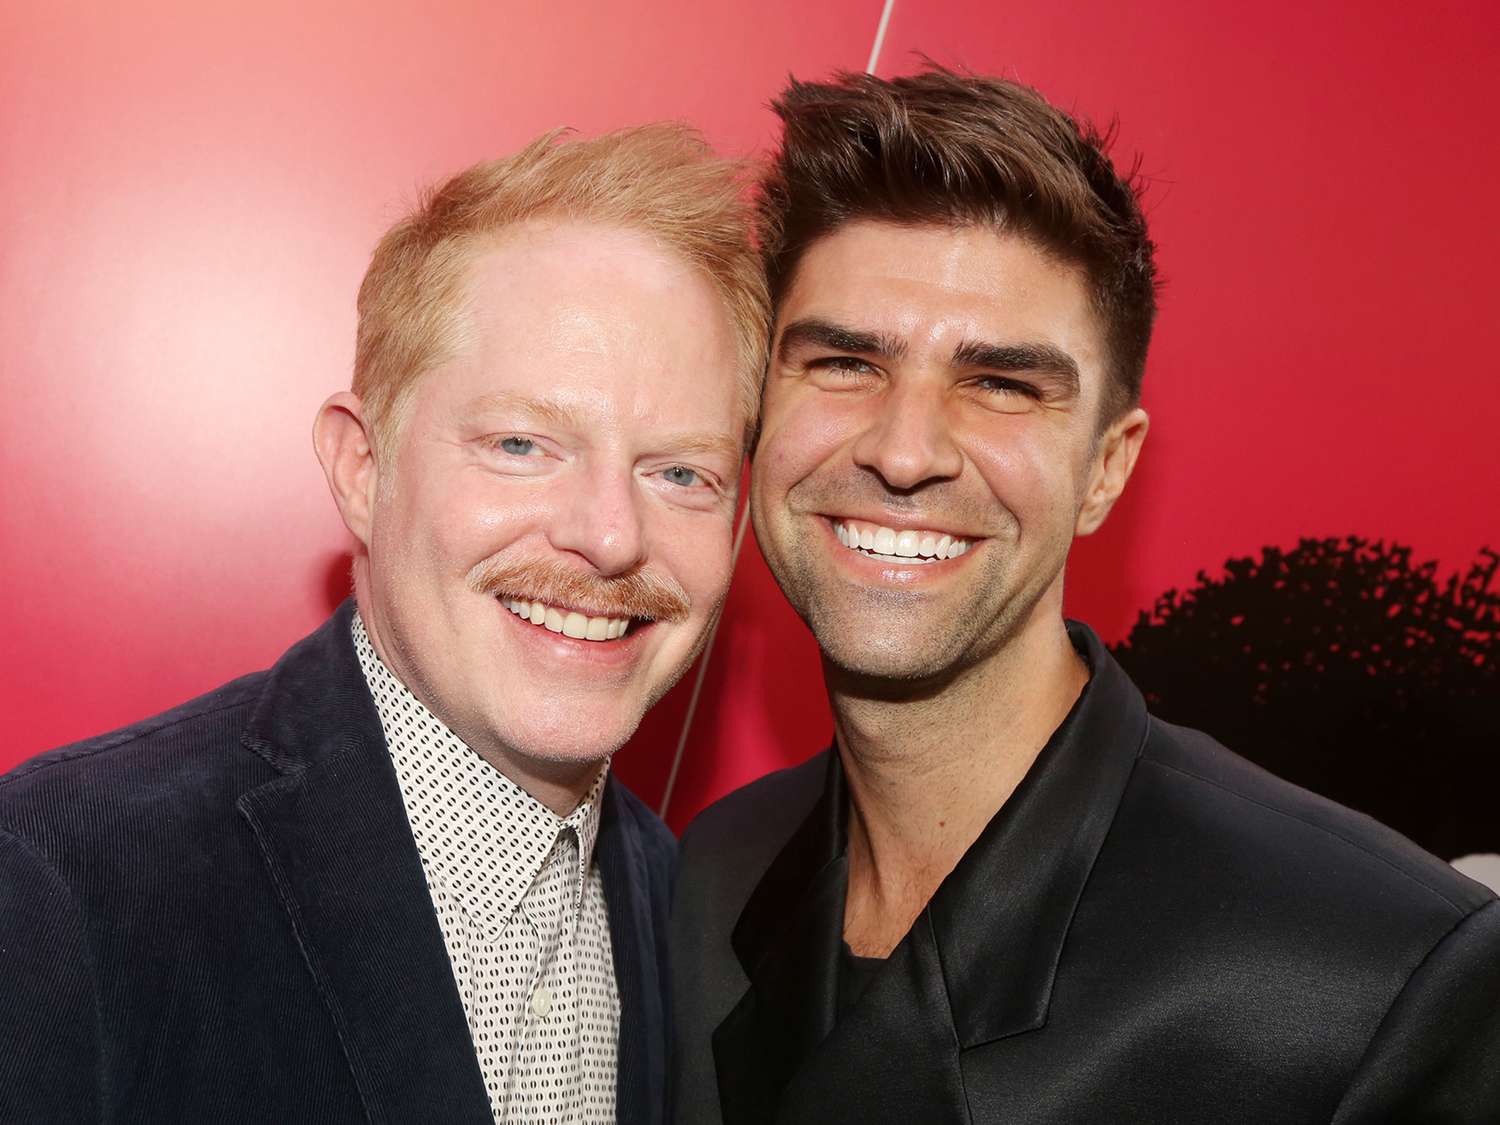 Jesse Tyler Ferguson and Justin Mikita pose at the opening night of the new play "POTUS" on Broadway at The Shubert Theater on May 1, 2022 in New York City